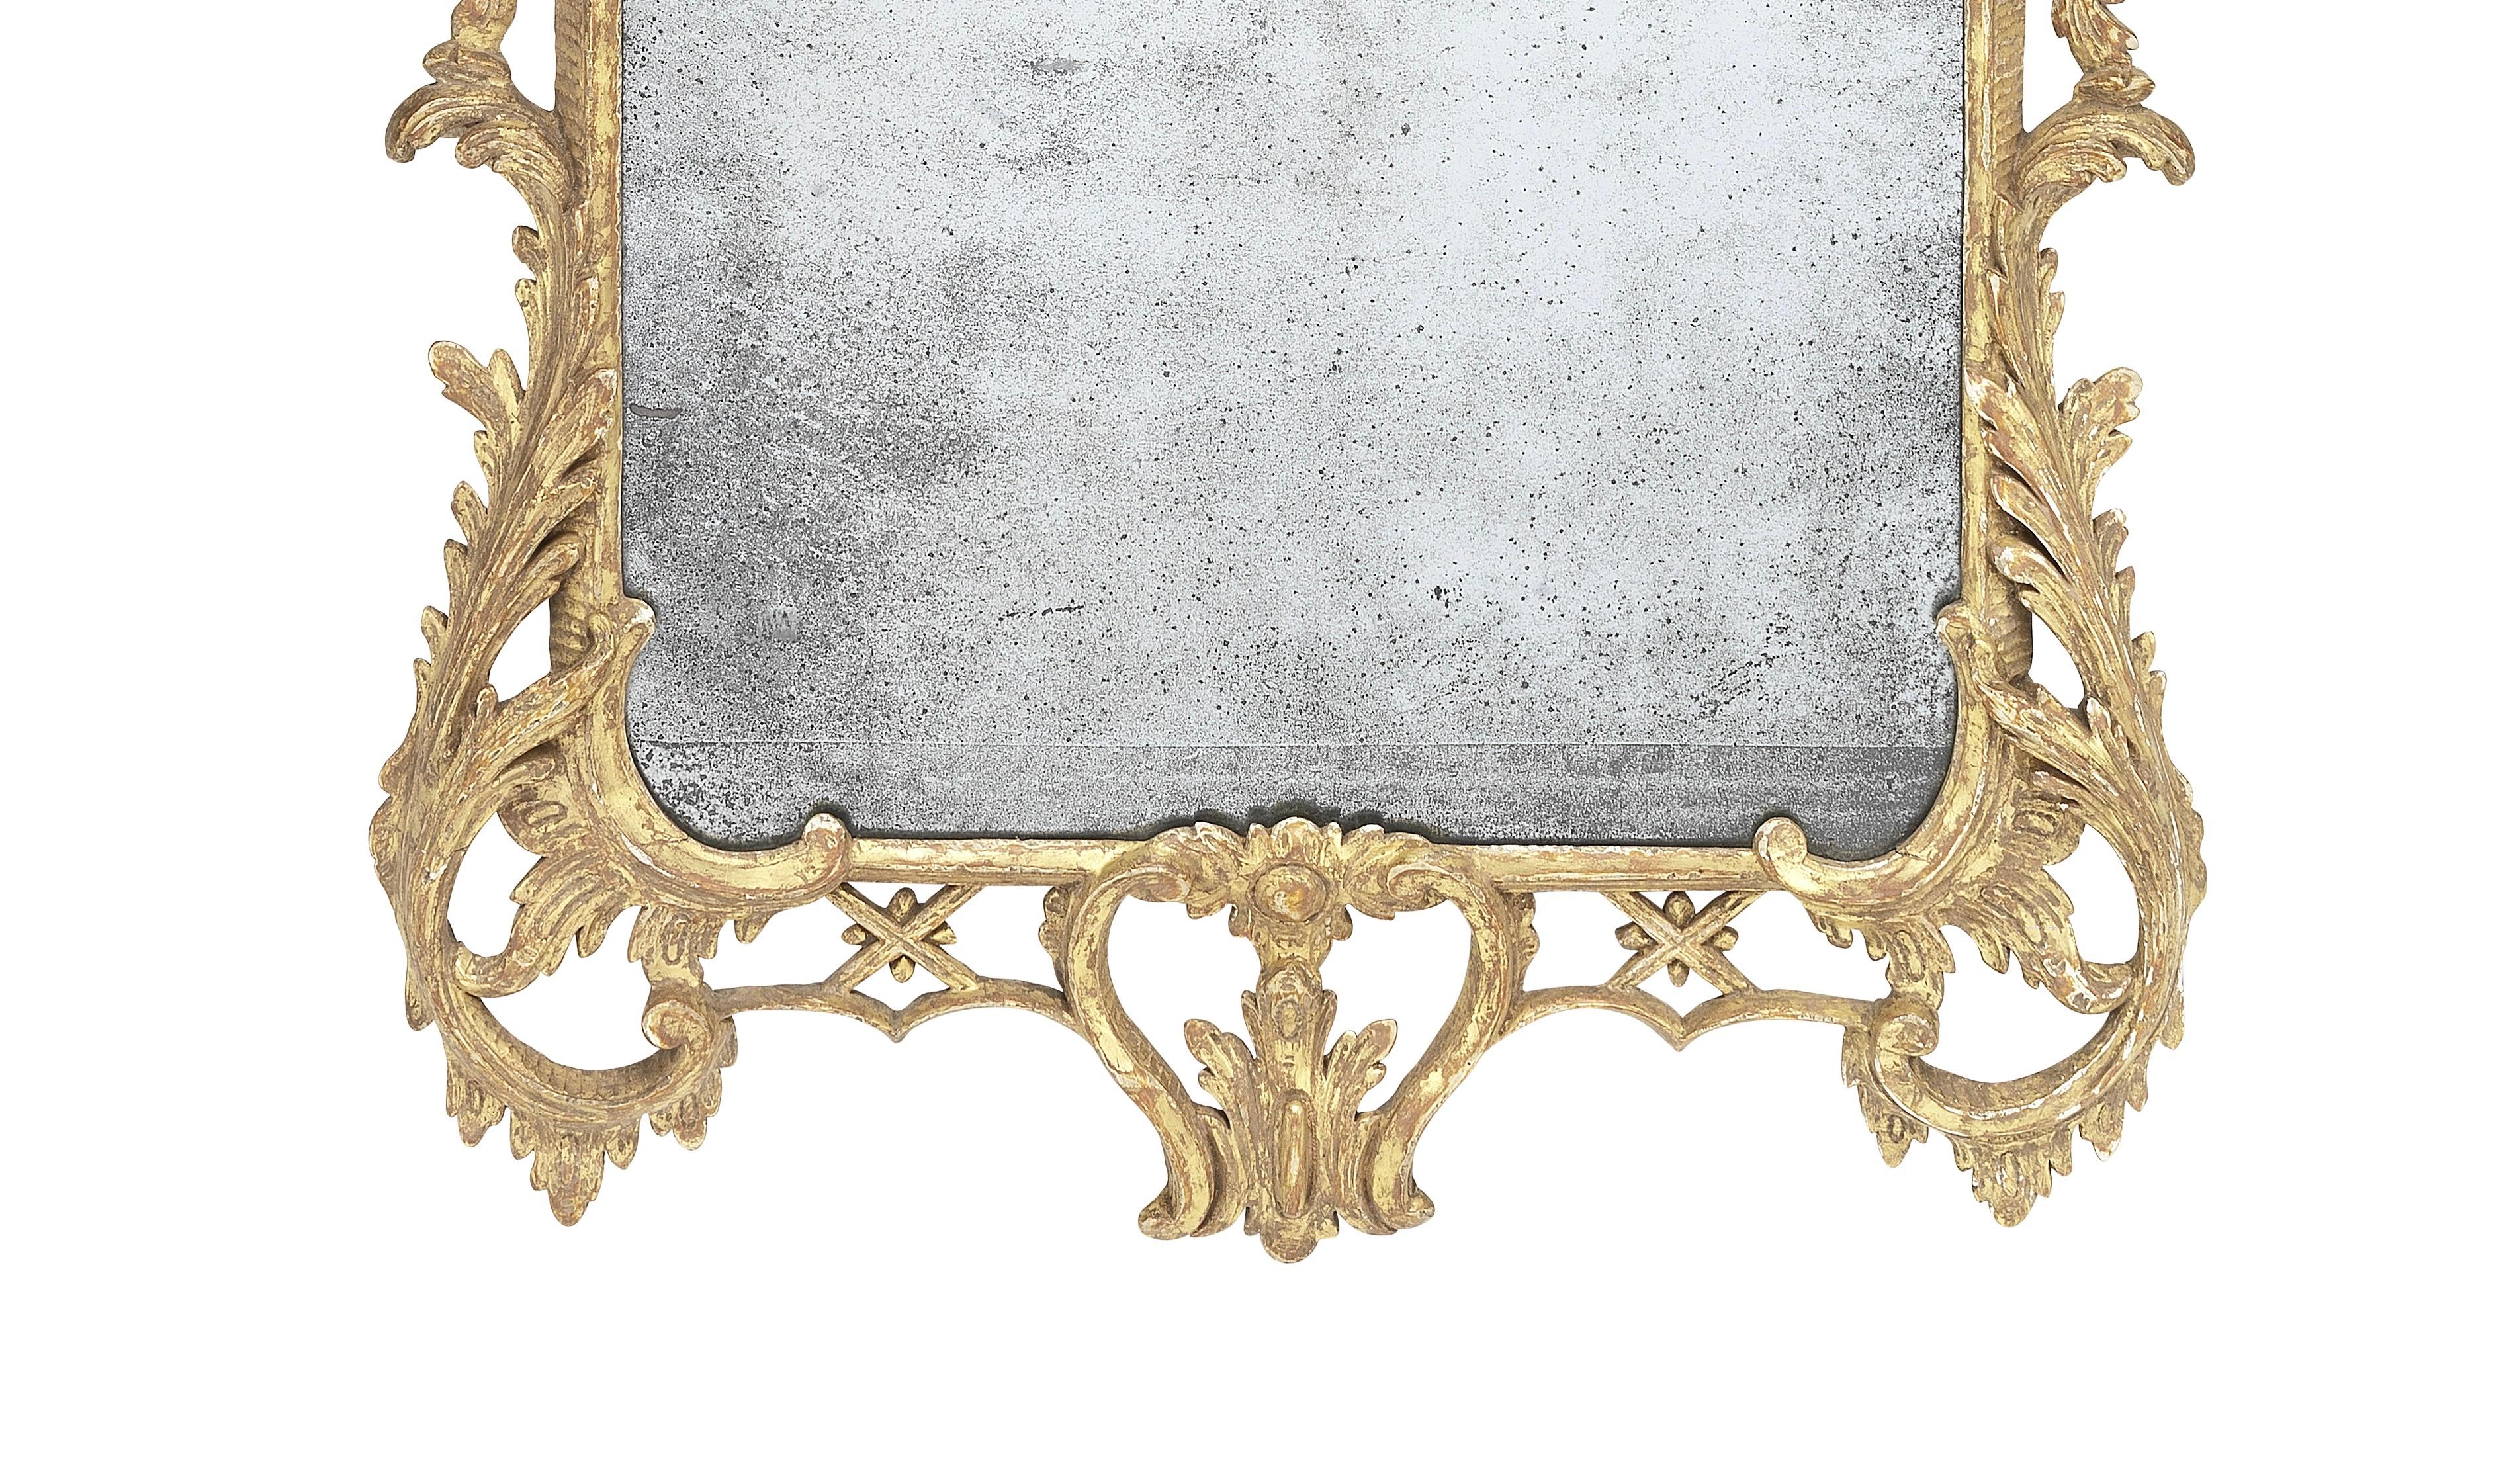 Rococo George III Chippendale Period Giltwood Mirror in the Manner of Thomas Johnson